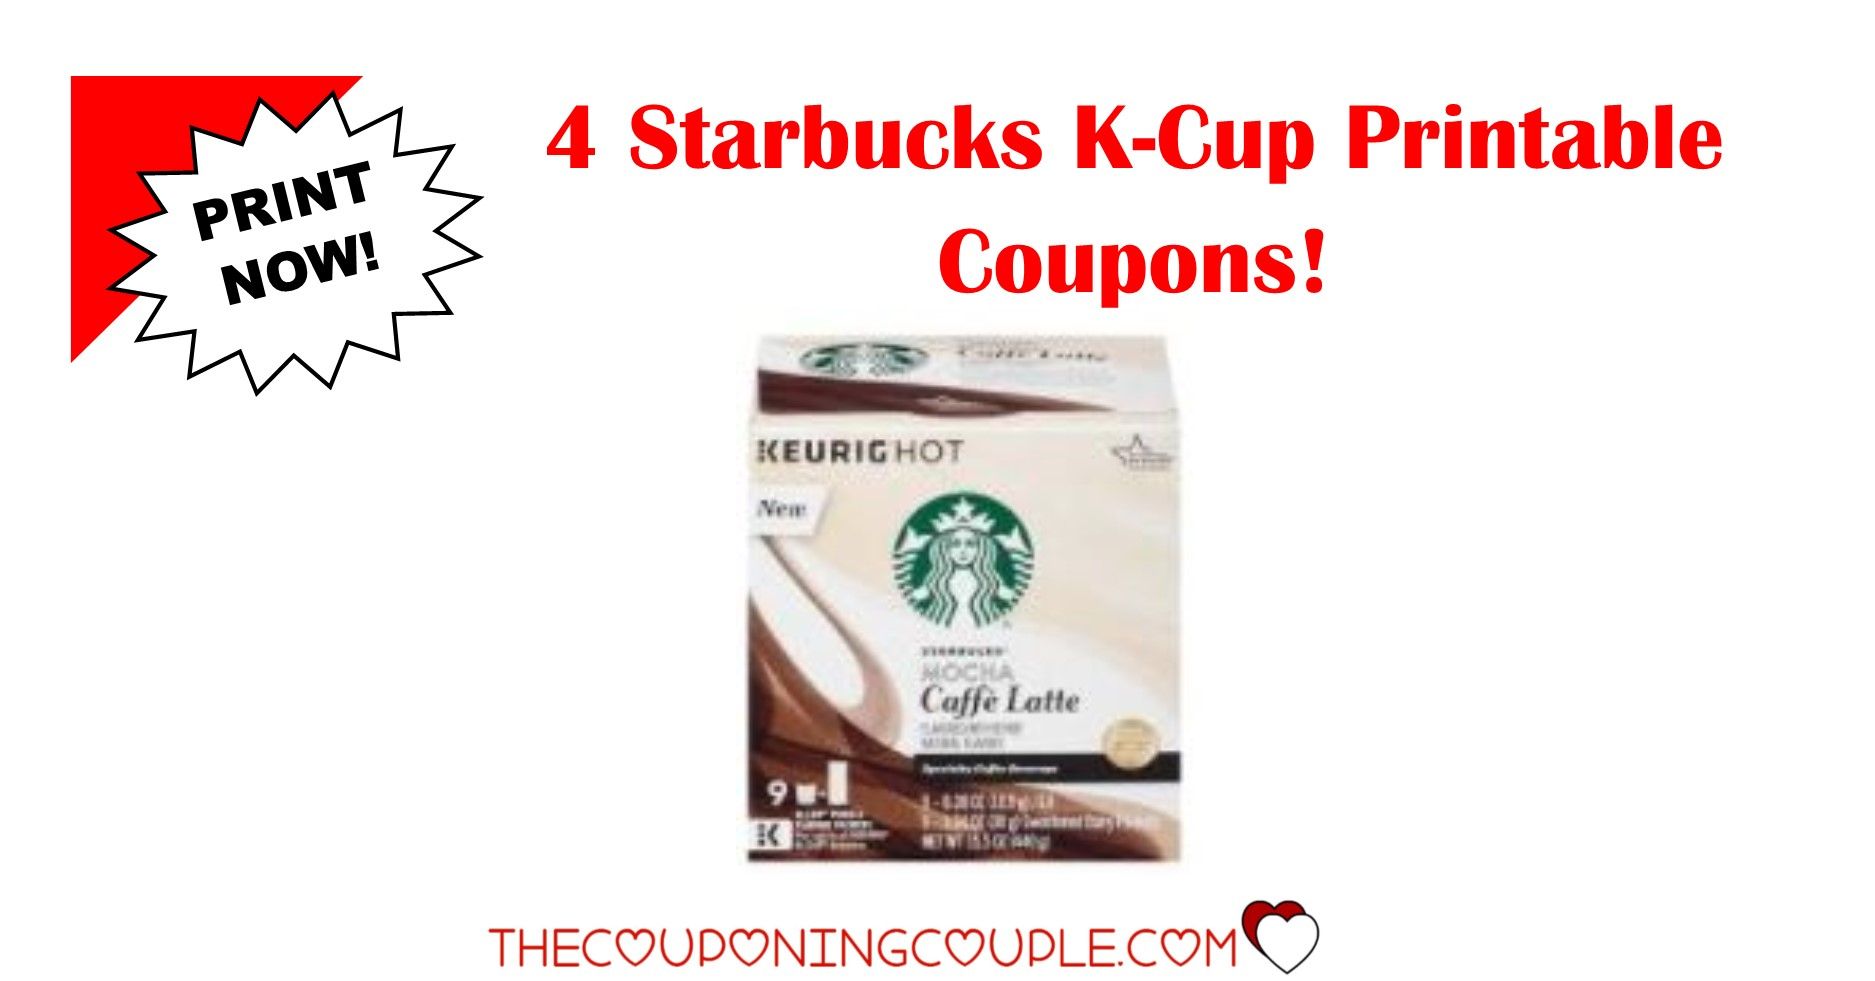 4 New Starbucks K-Cup Pods Printable Coupons ~ Save $7.75! - Free Starbucks Coupon Printable